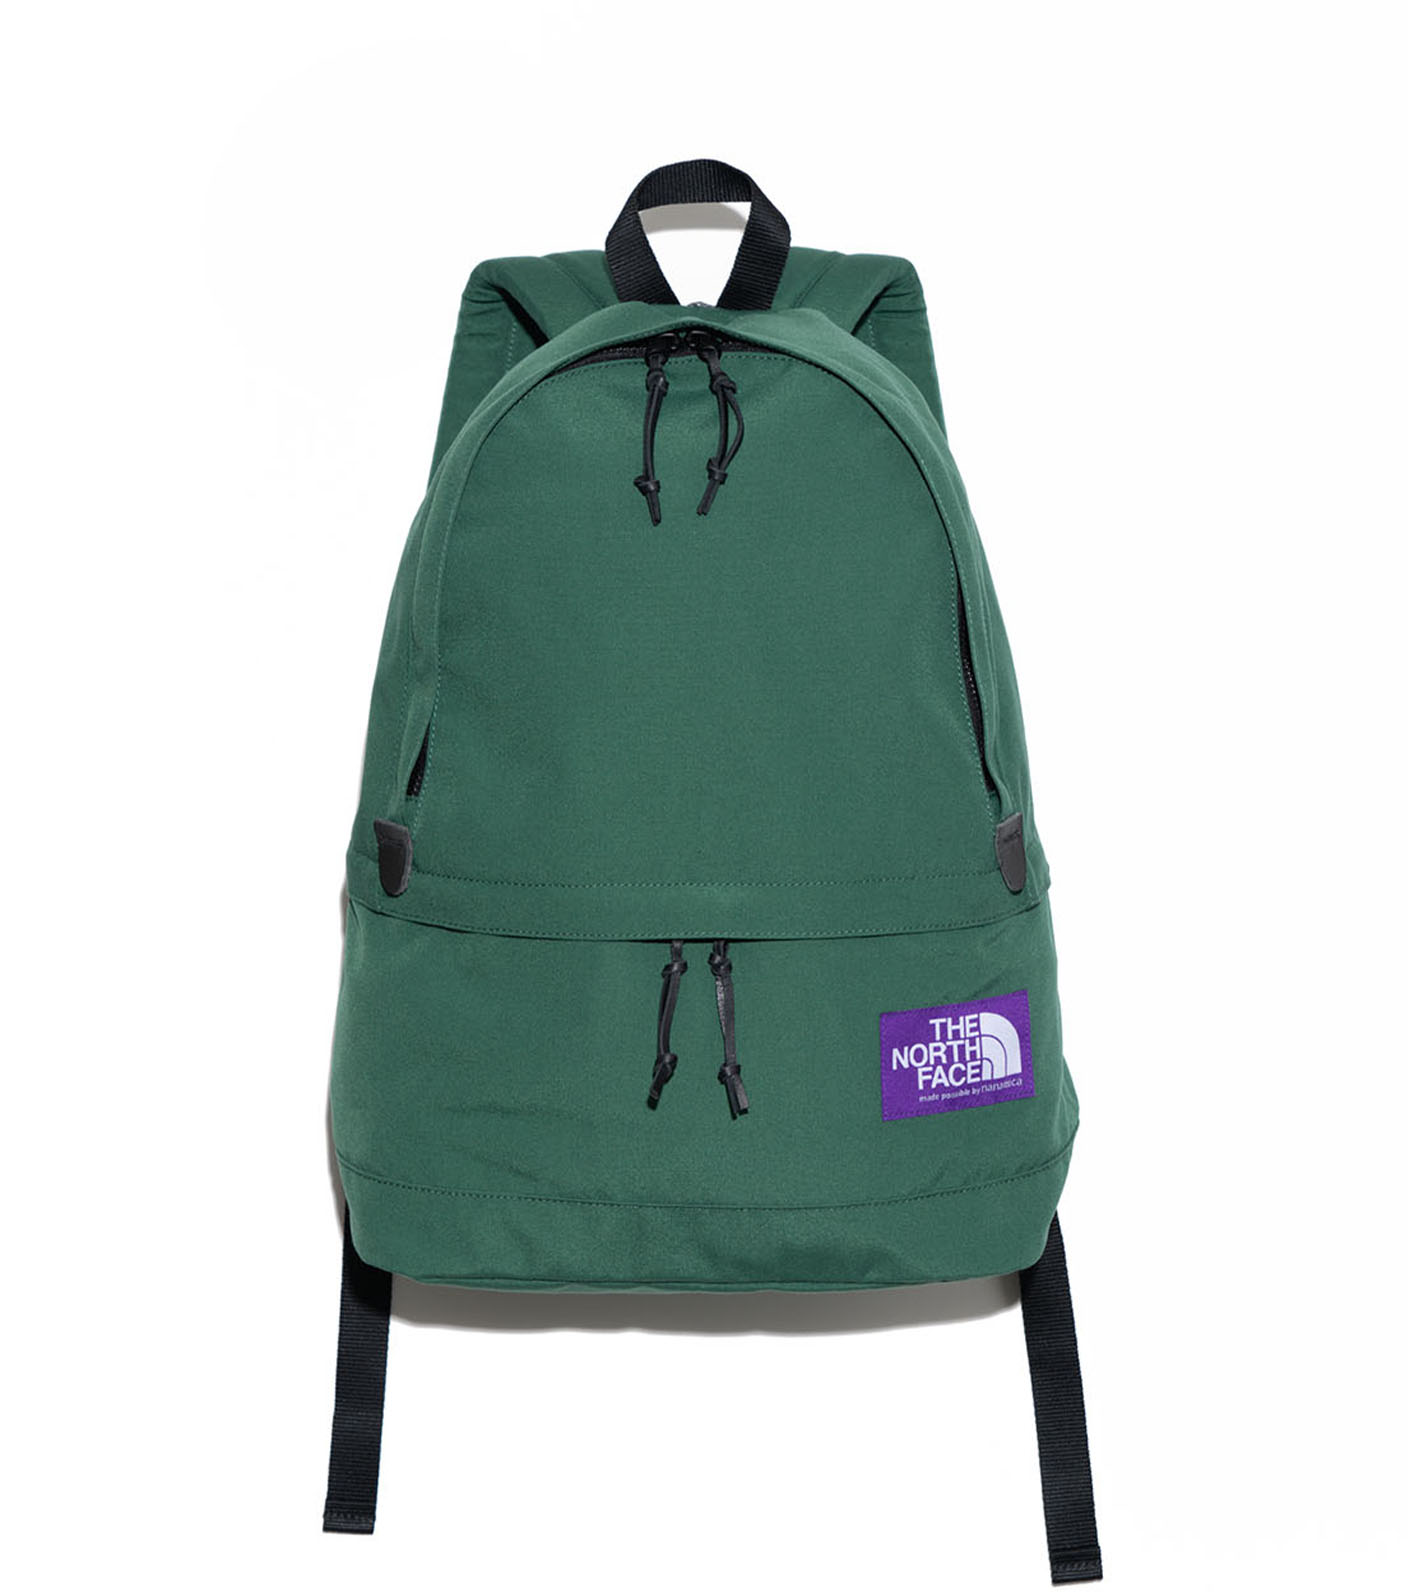 THE NORTH FACE   Field Day Pack 新品タグ付き